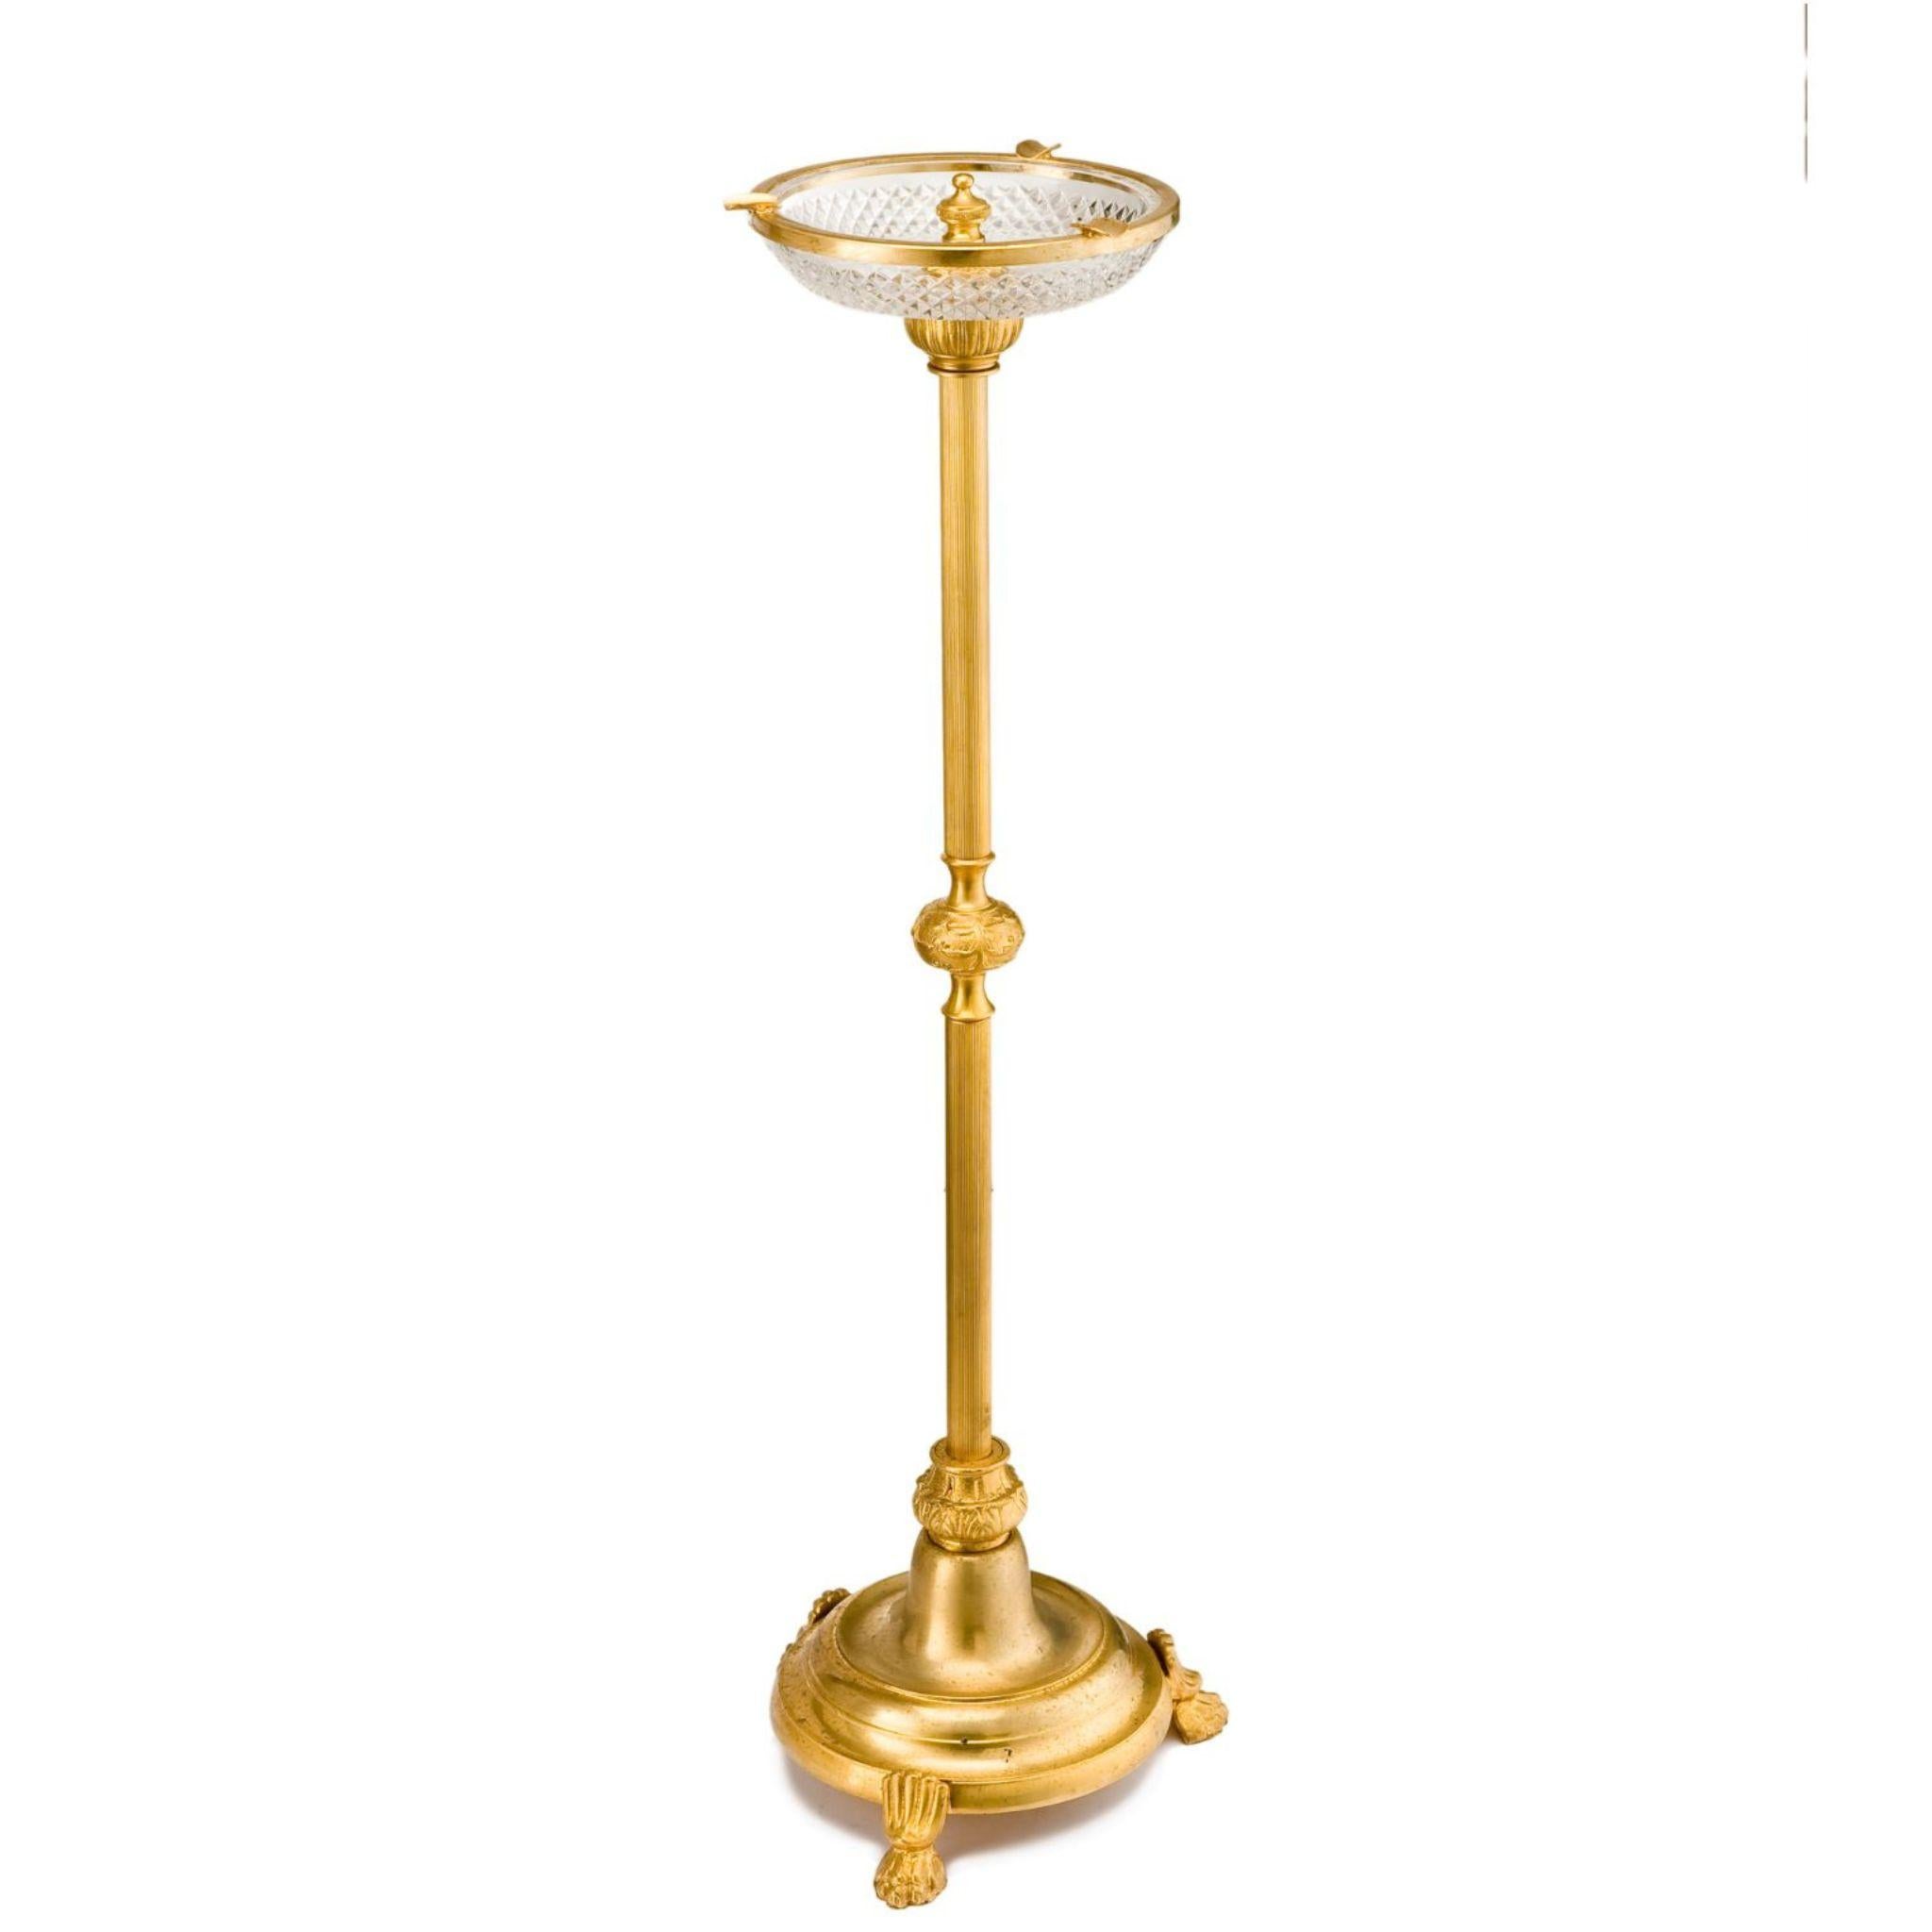 This brass floor ashtray is a perfect combination of style and function. With a sleek and modern design, it will fit perfectly into any decor, while its durable brass construction ensures it can withstand regular use. A must-have for any smoking